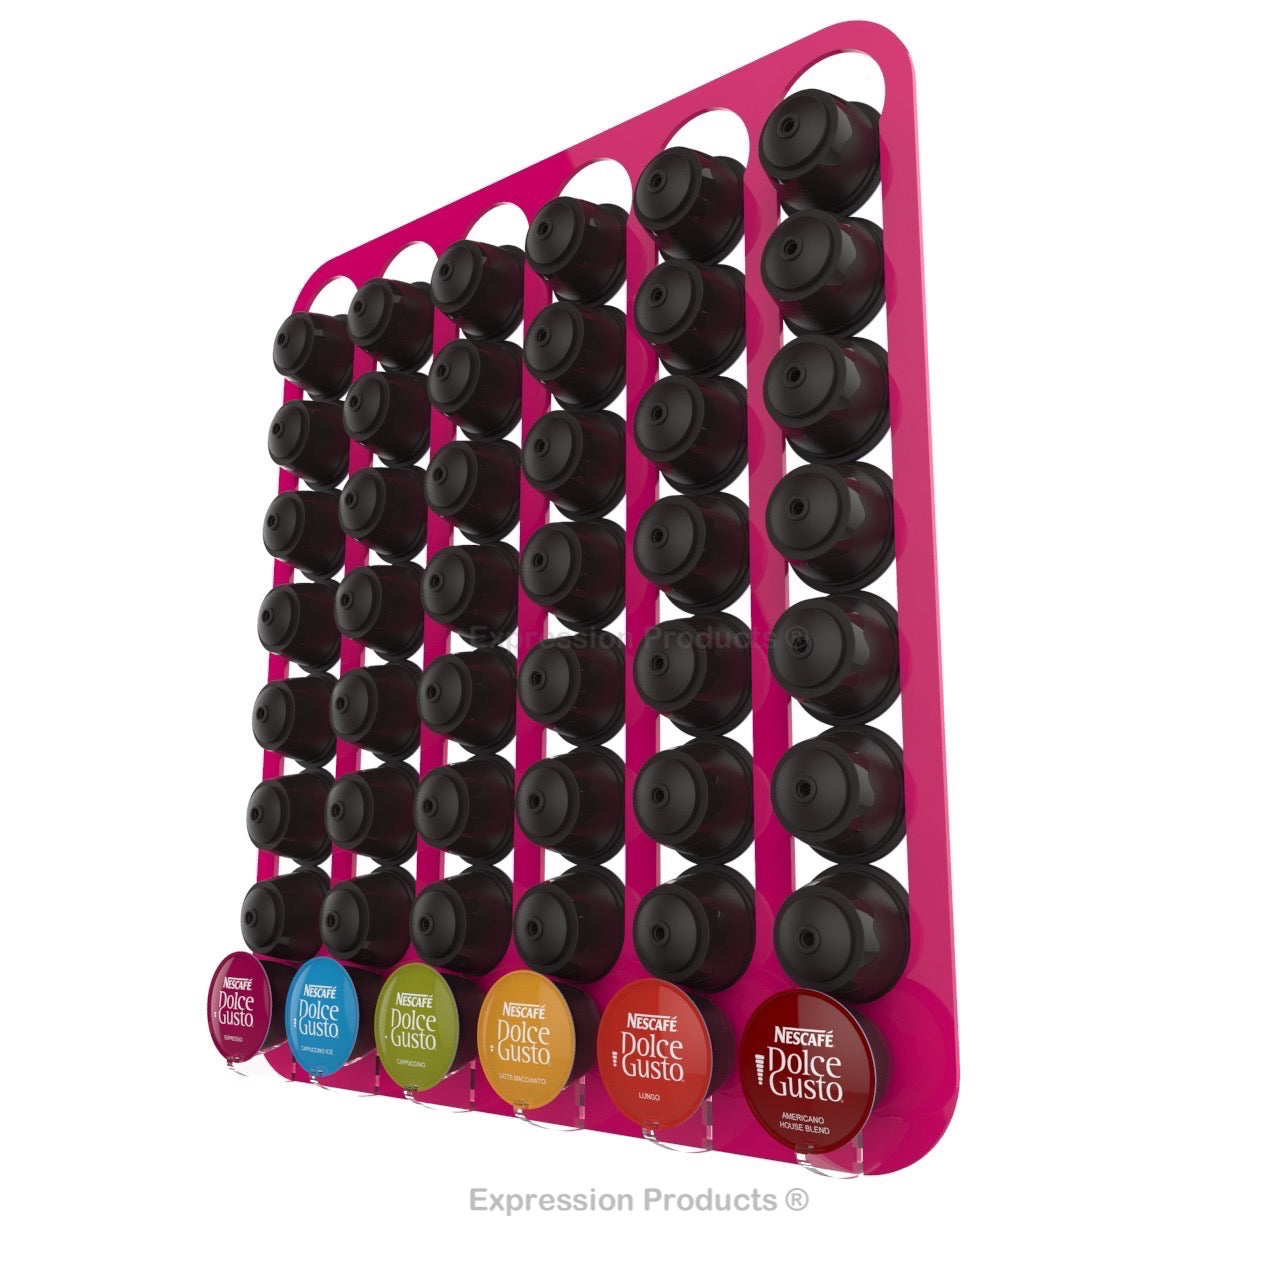 Dolce Gusto Coffee Pod Holder, Wall Mounted.  Shown in Pink Holding 48 Pods